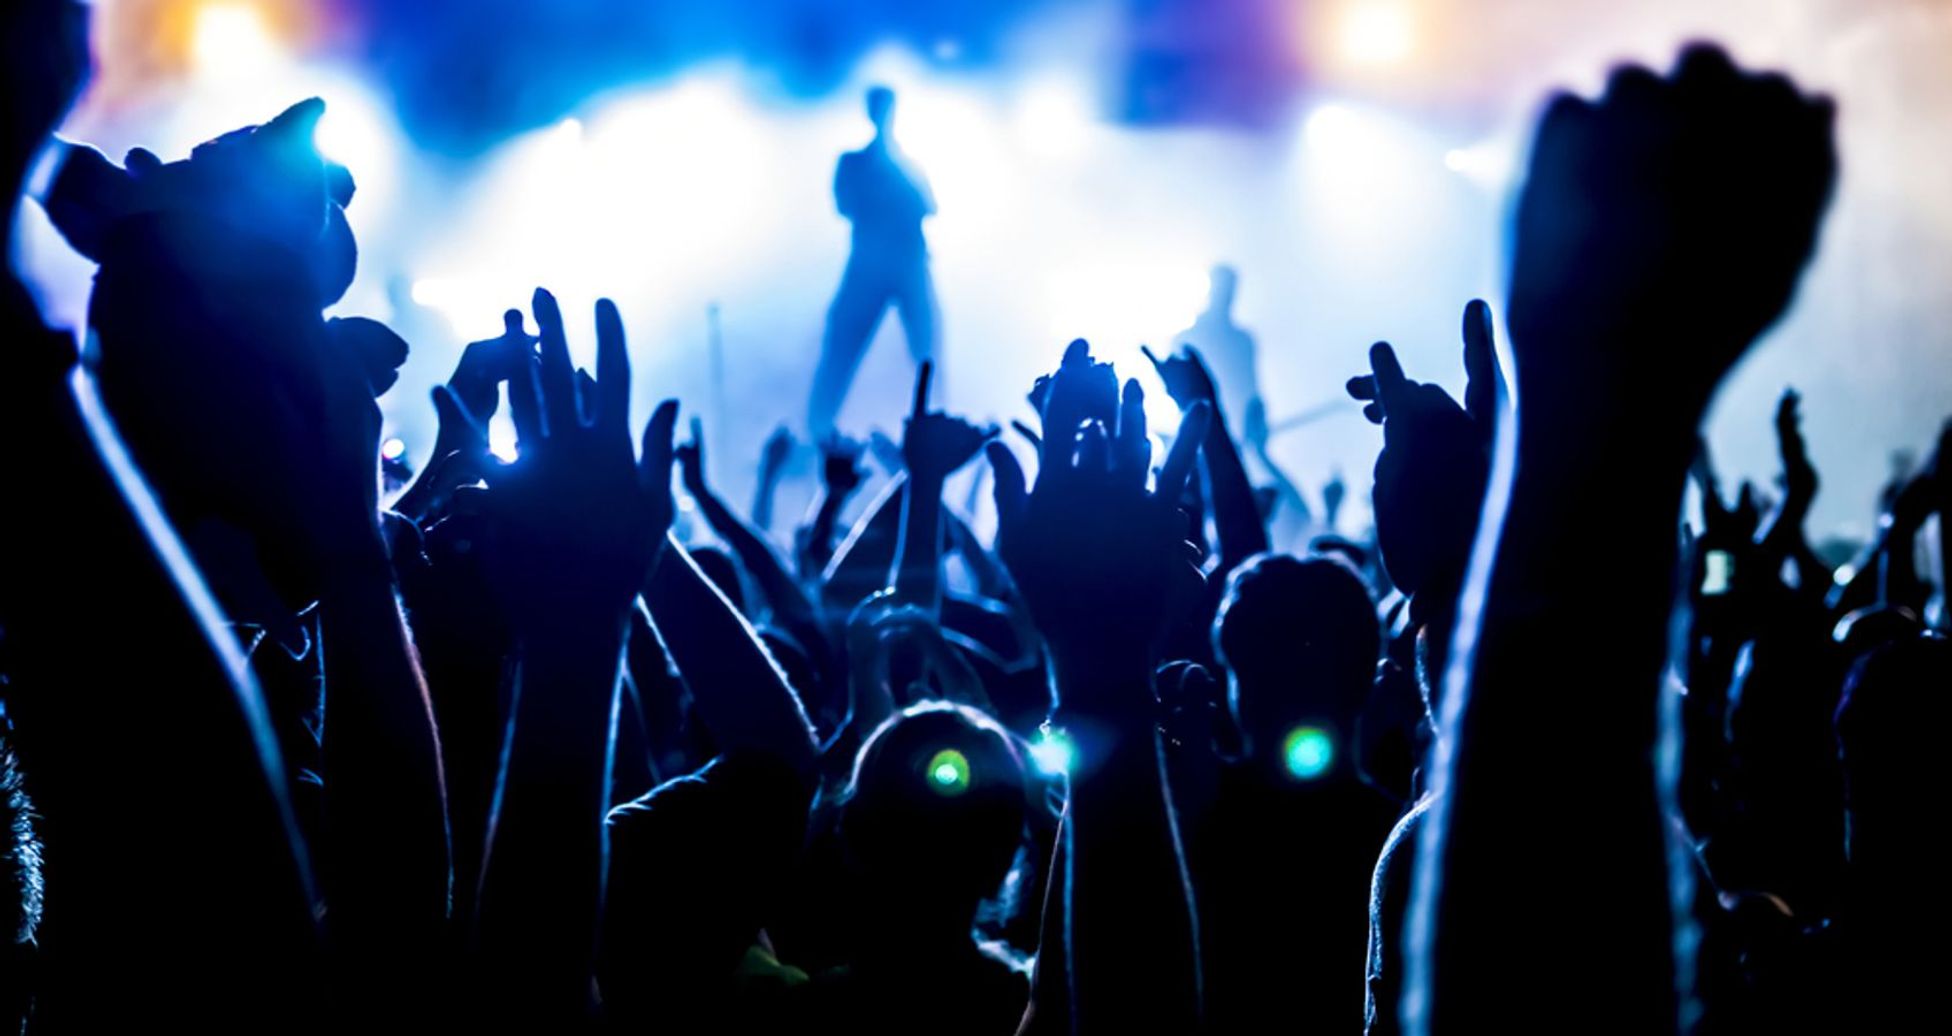 Finding the Rock Stars in Today's Employee Market